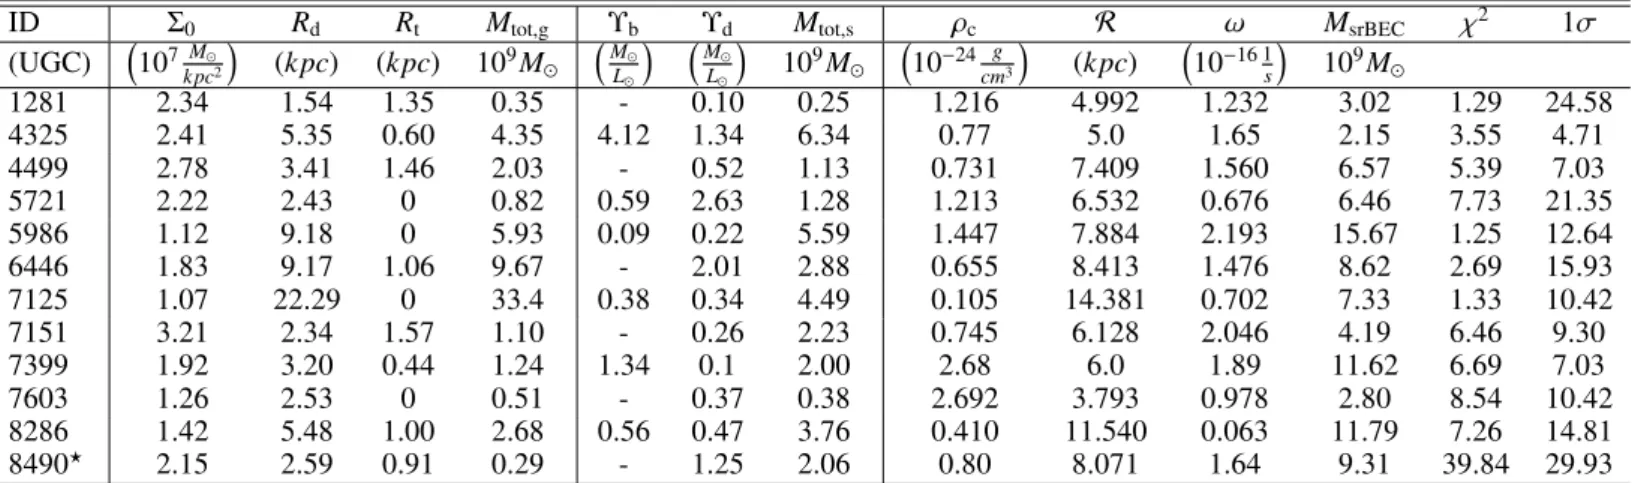 Table 3. Best-fit parameters of the rotational curve models of 12 dwarf galaxies. The best-fit central surface mass density (Σ 0 ), the scale length (R d ), and the truncation radius (R t ) of the gaseous component can be found in columns 2-4